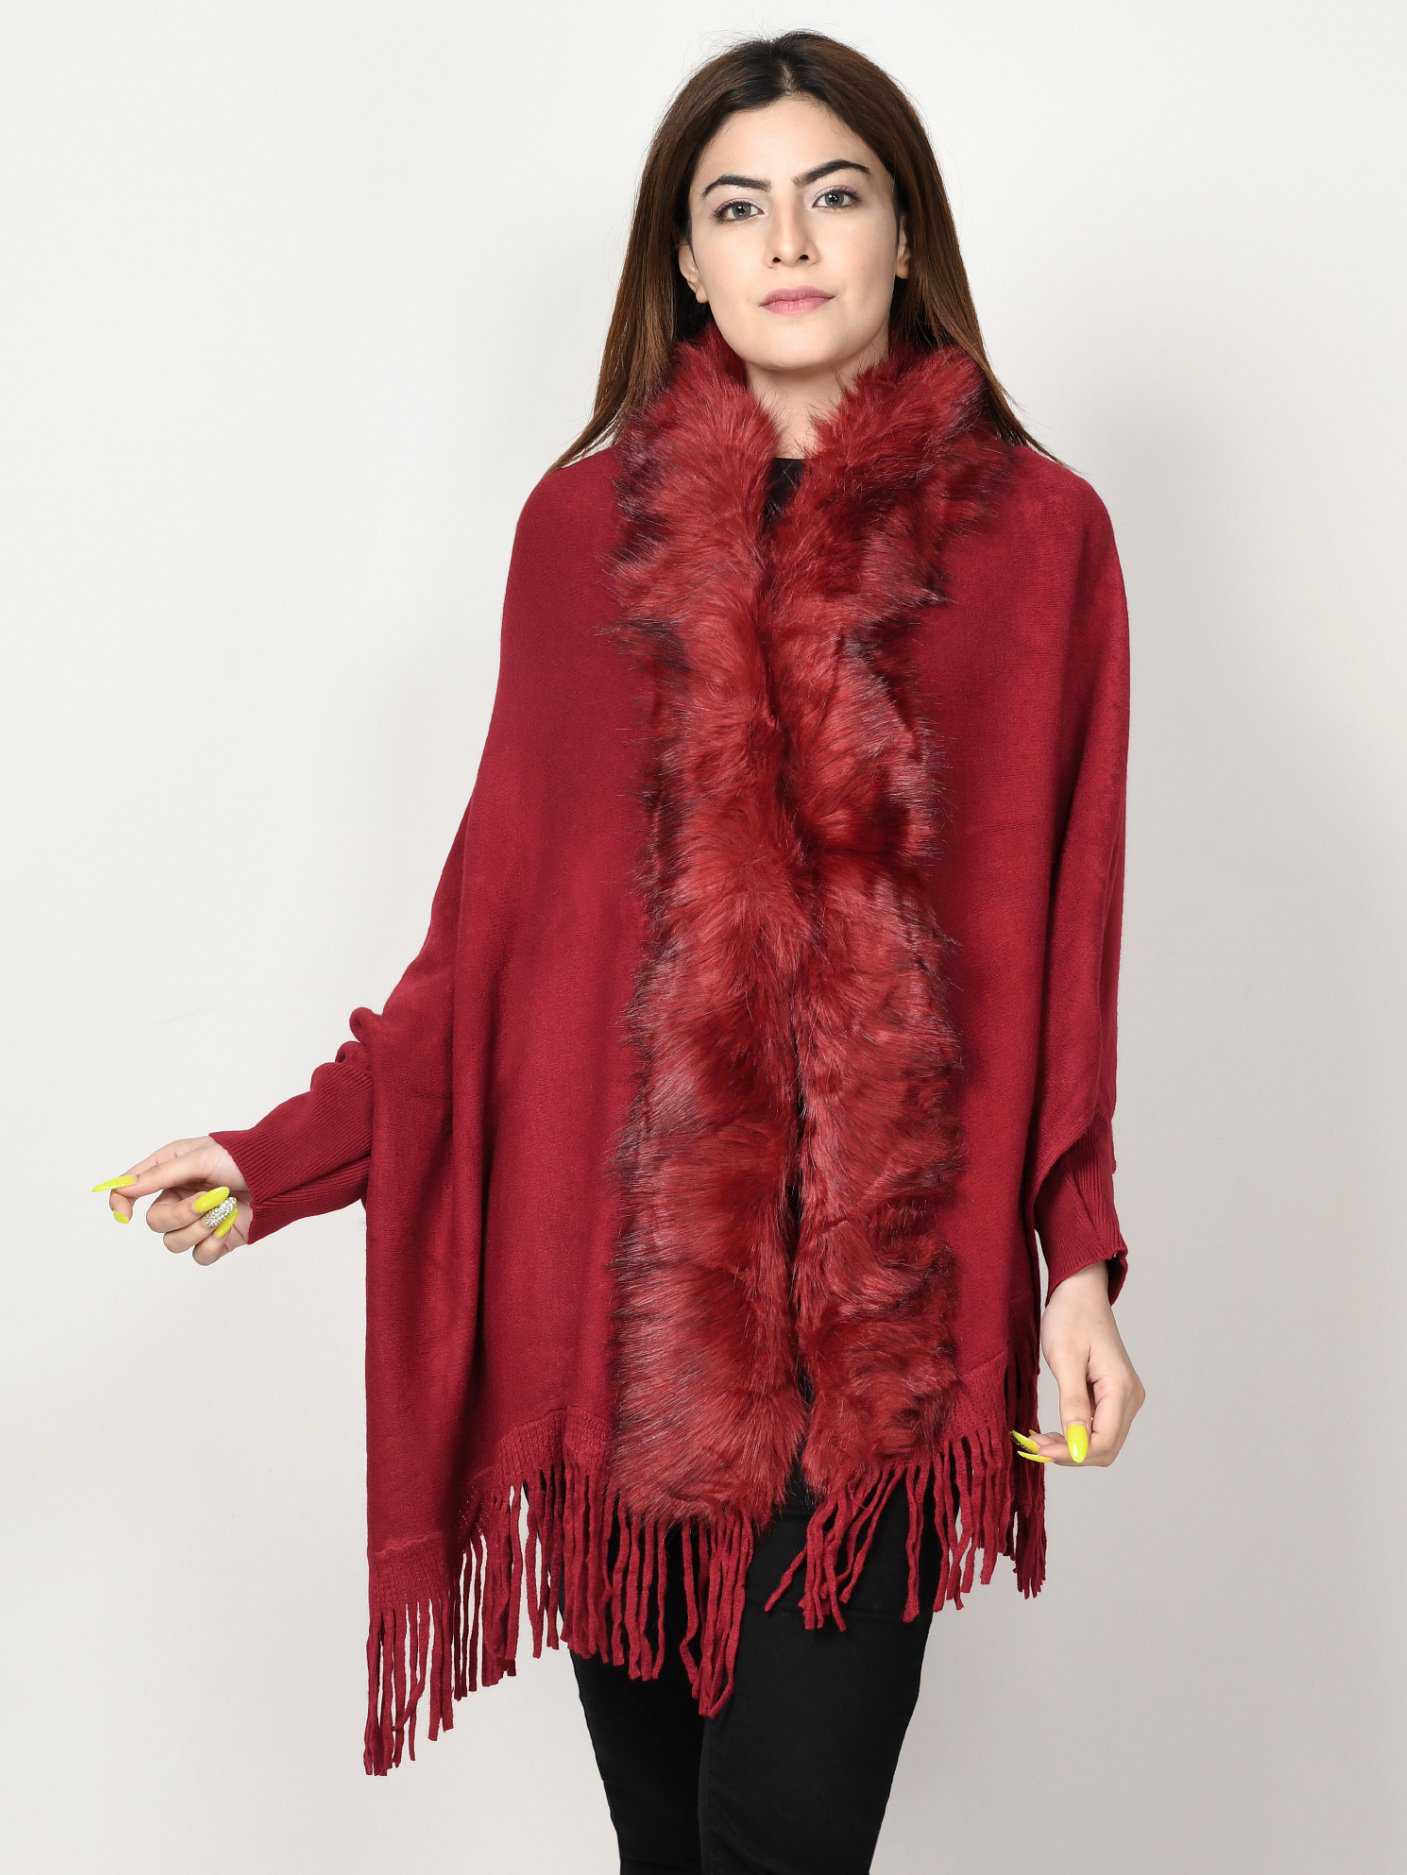 Limelight Fur Cape Shawl CPS99-FRE-RED 2019 | Limelight Sale 2020